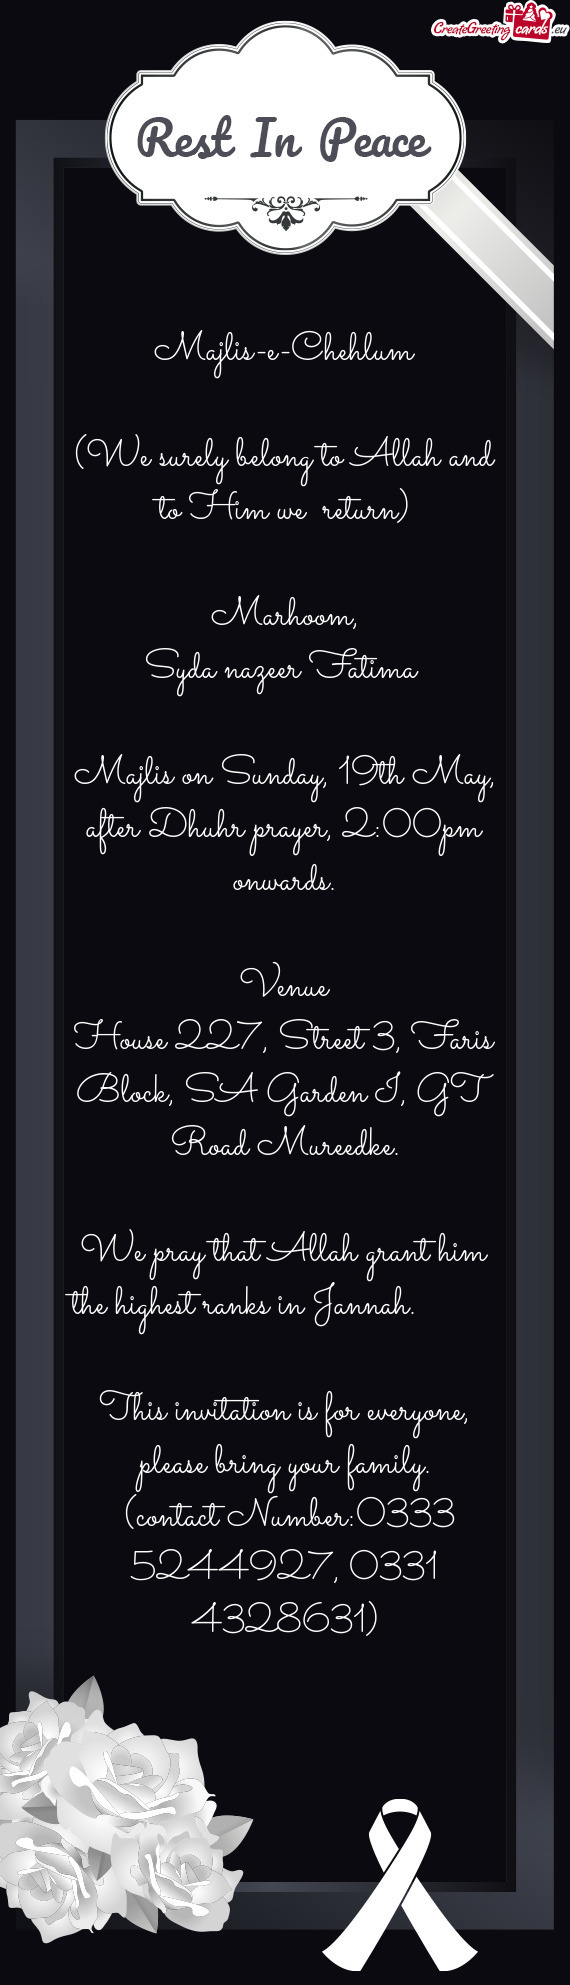 This invitation is for everyone, please bring your family